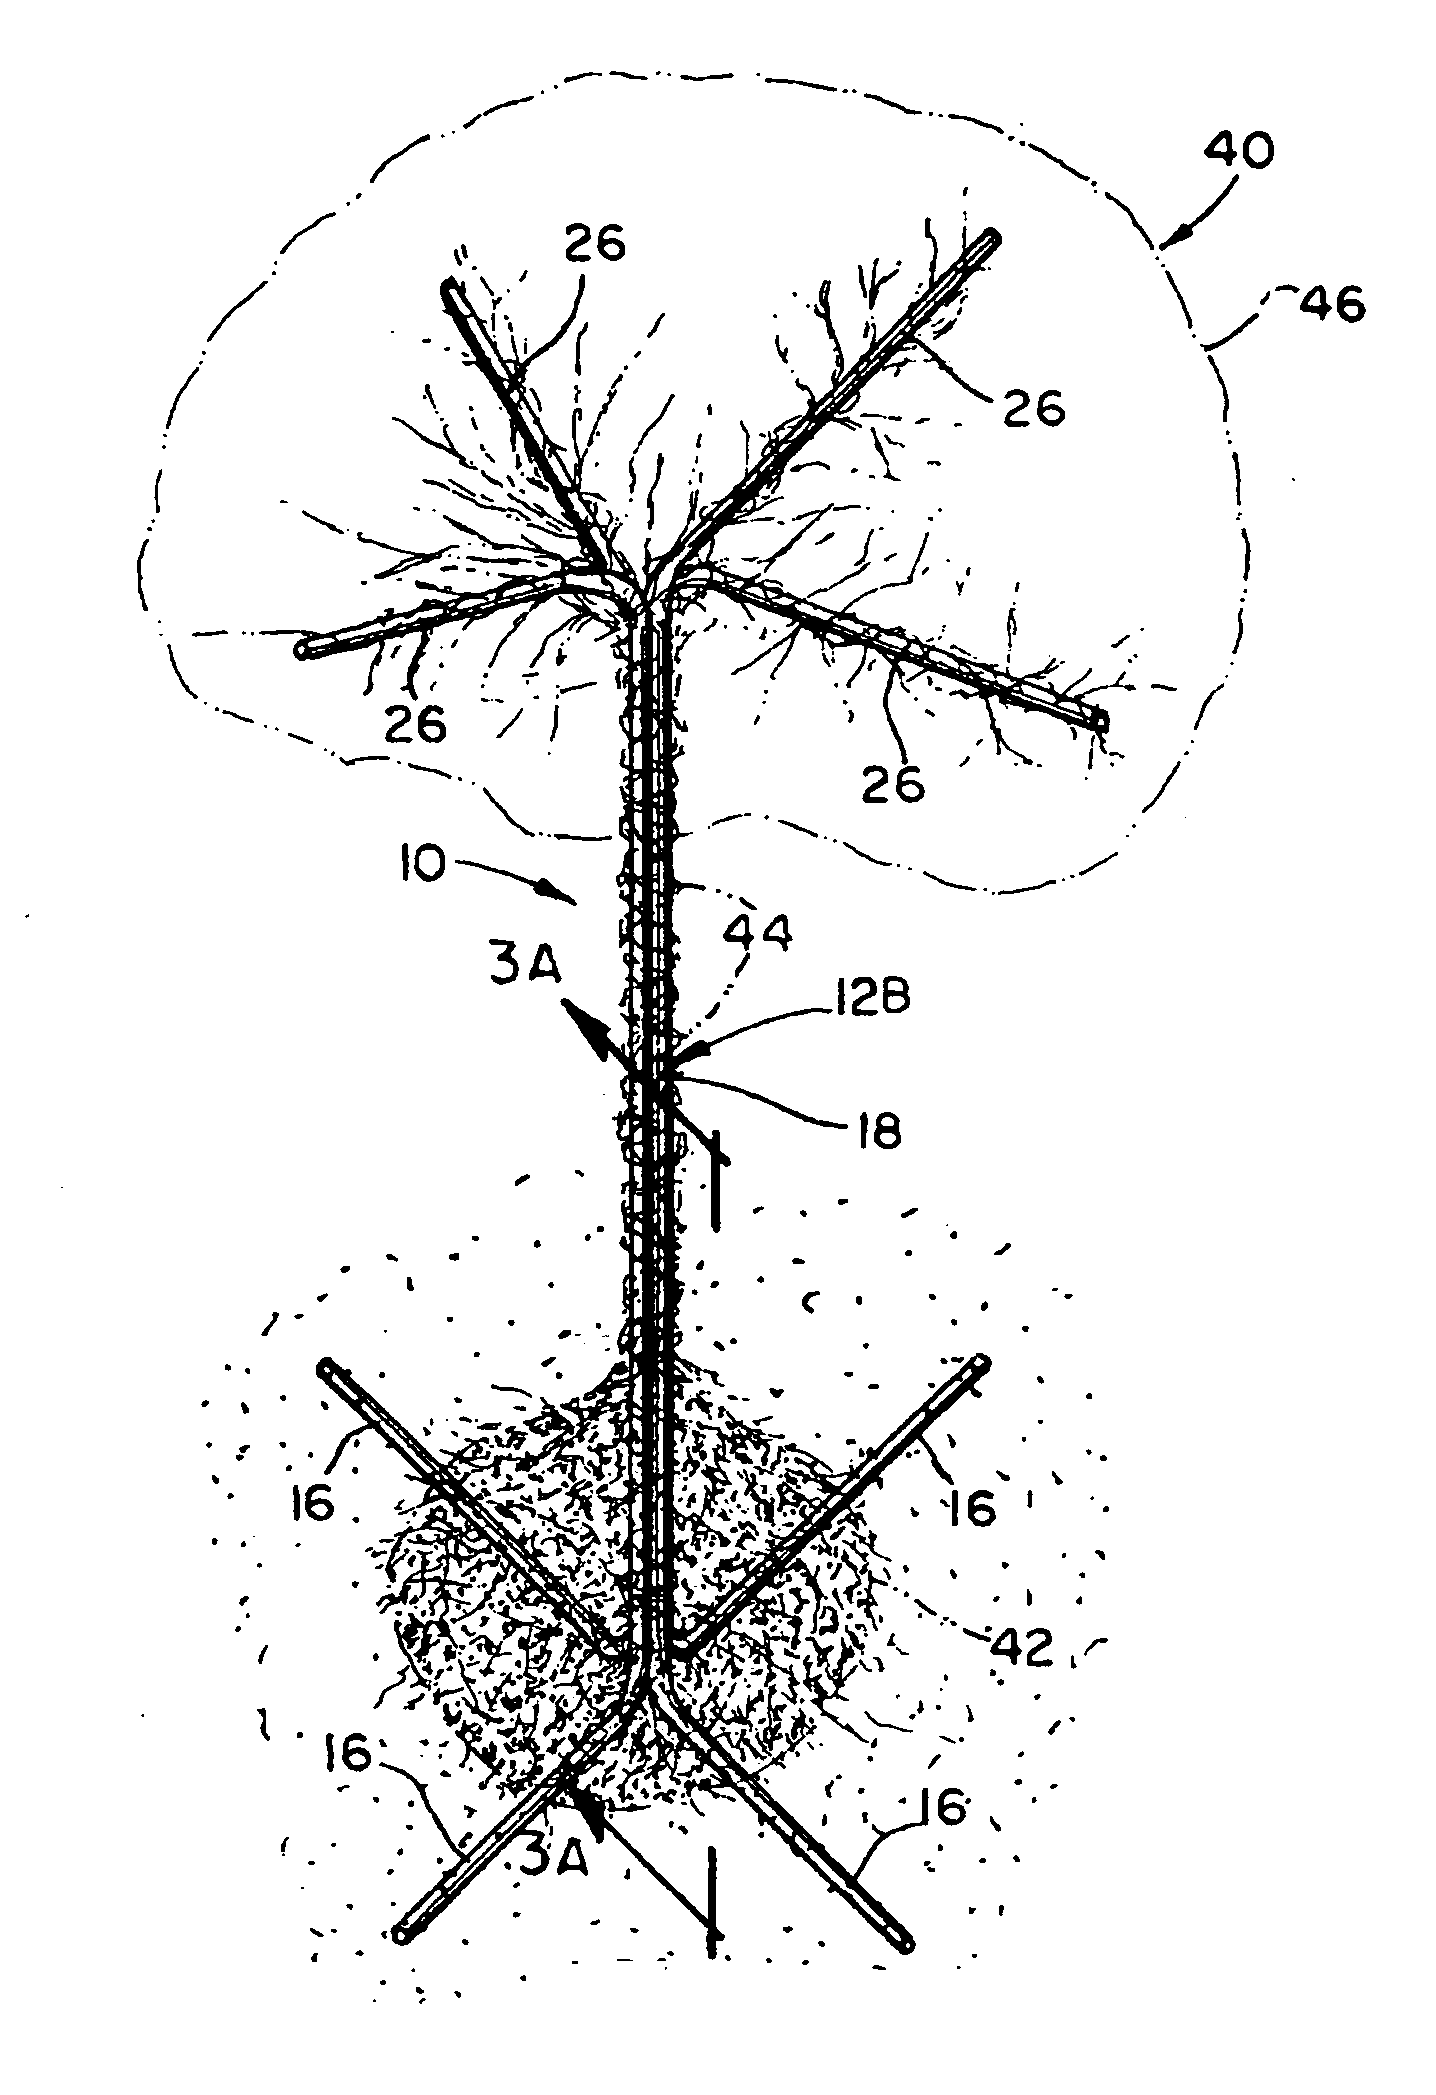 Permanent underground staking system and apparatus for vines and weakly rooted trees